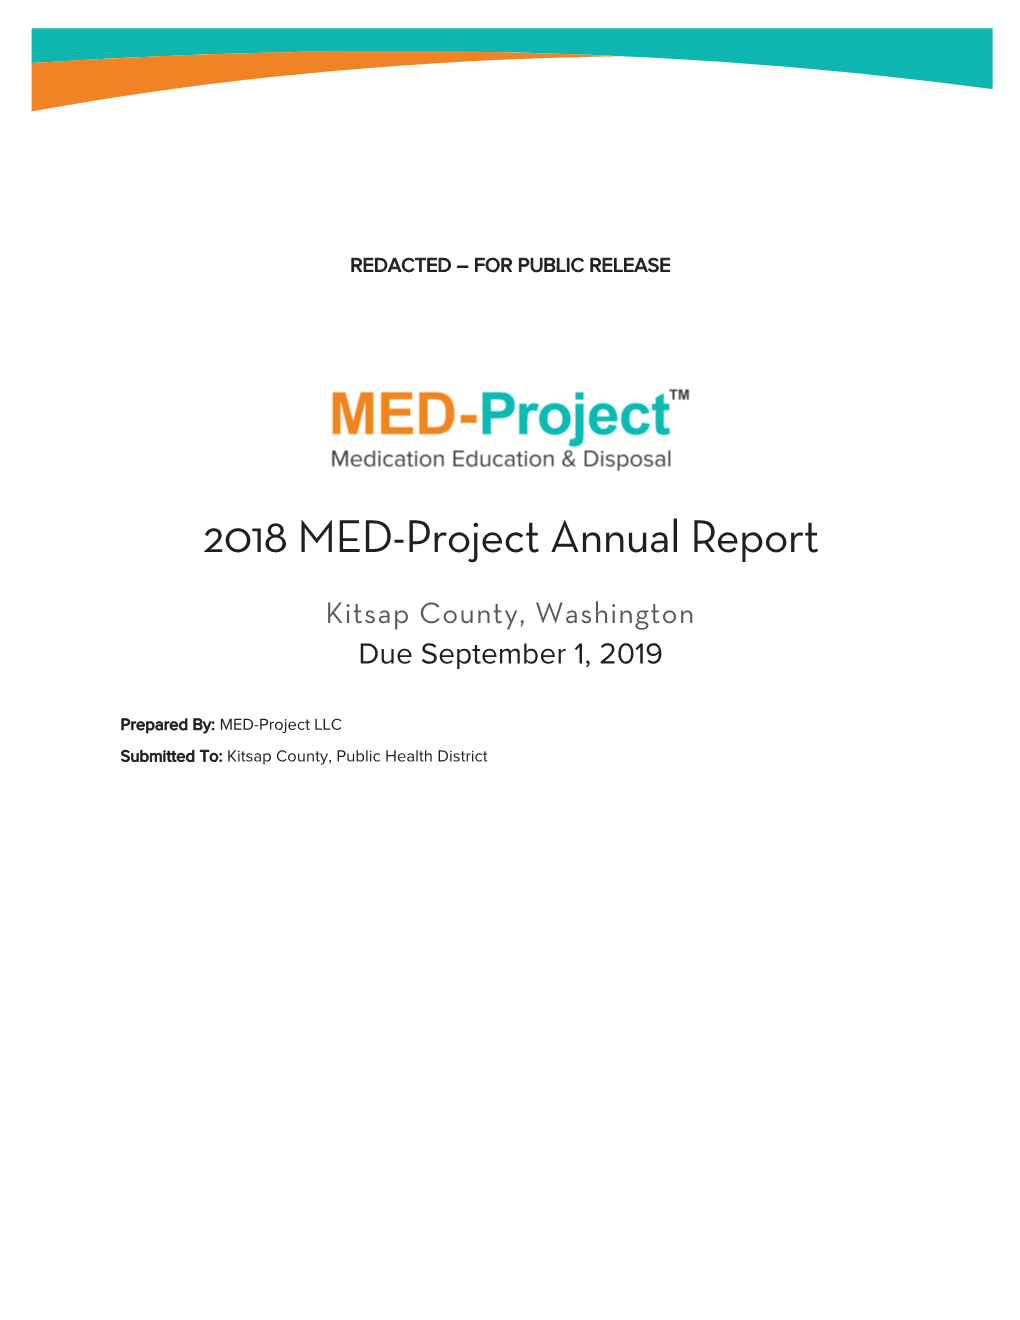 2018 MED-Project Annual Report